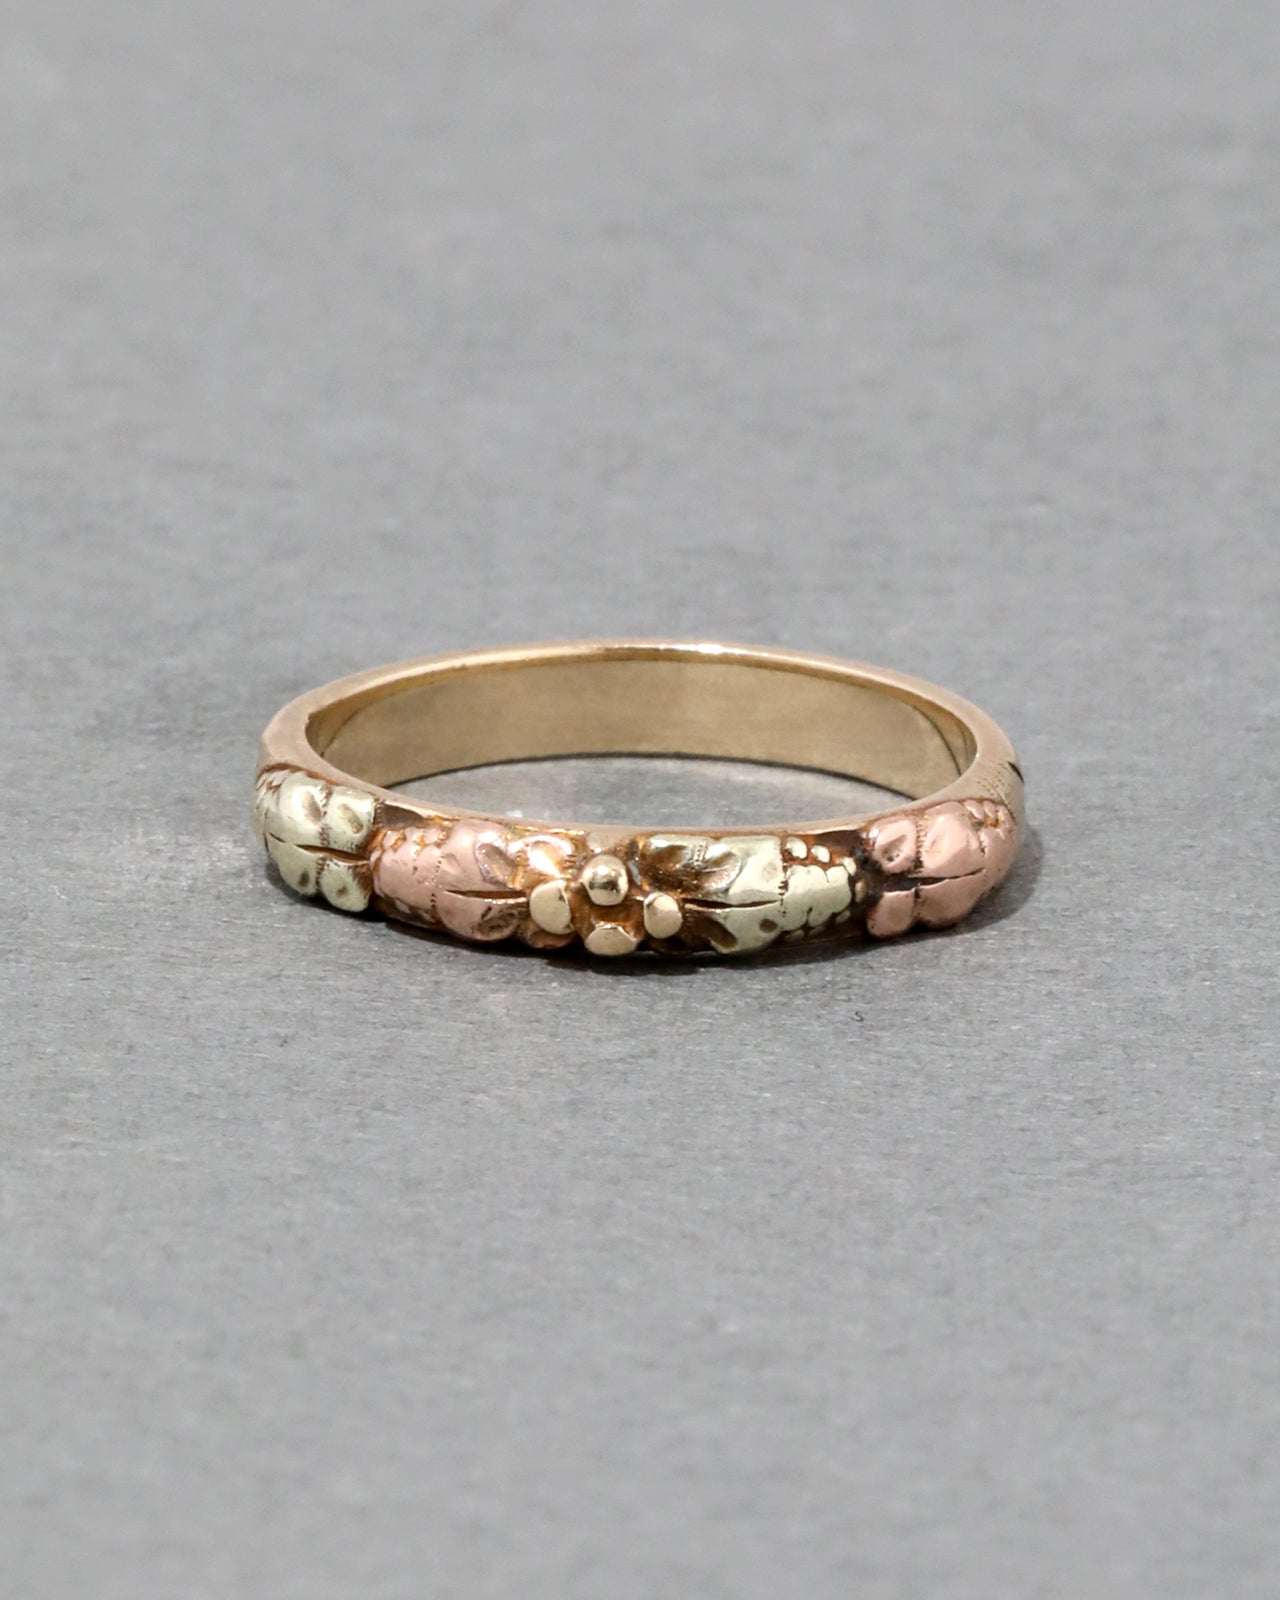 Antique 1920s 10k Gold Floral Band Ring - Photo 2